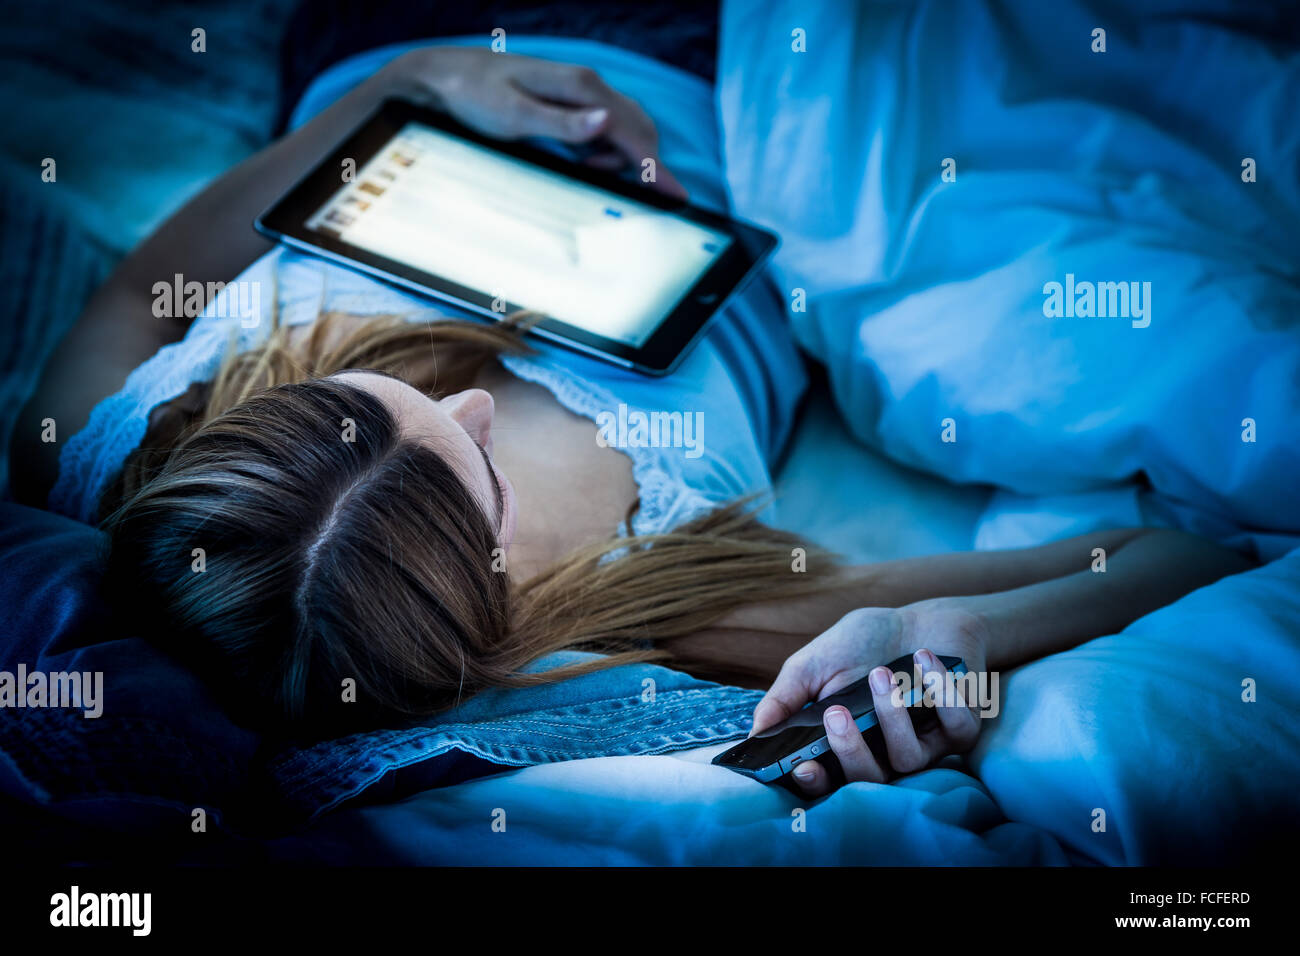 Woman using a digital tablet and phone at night. Stock Photo